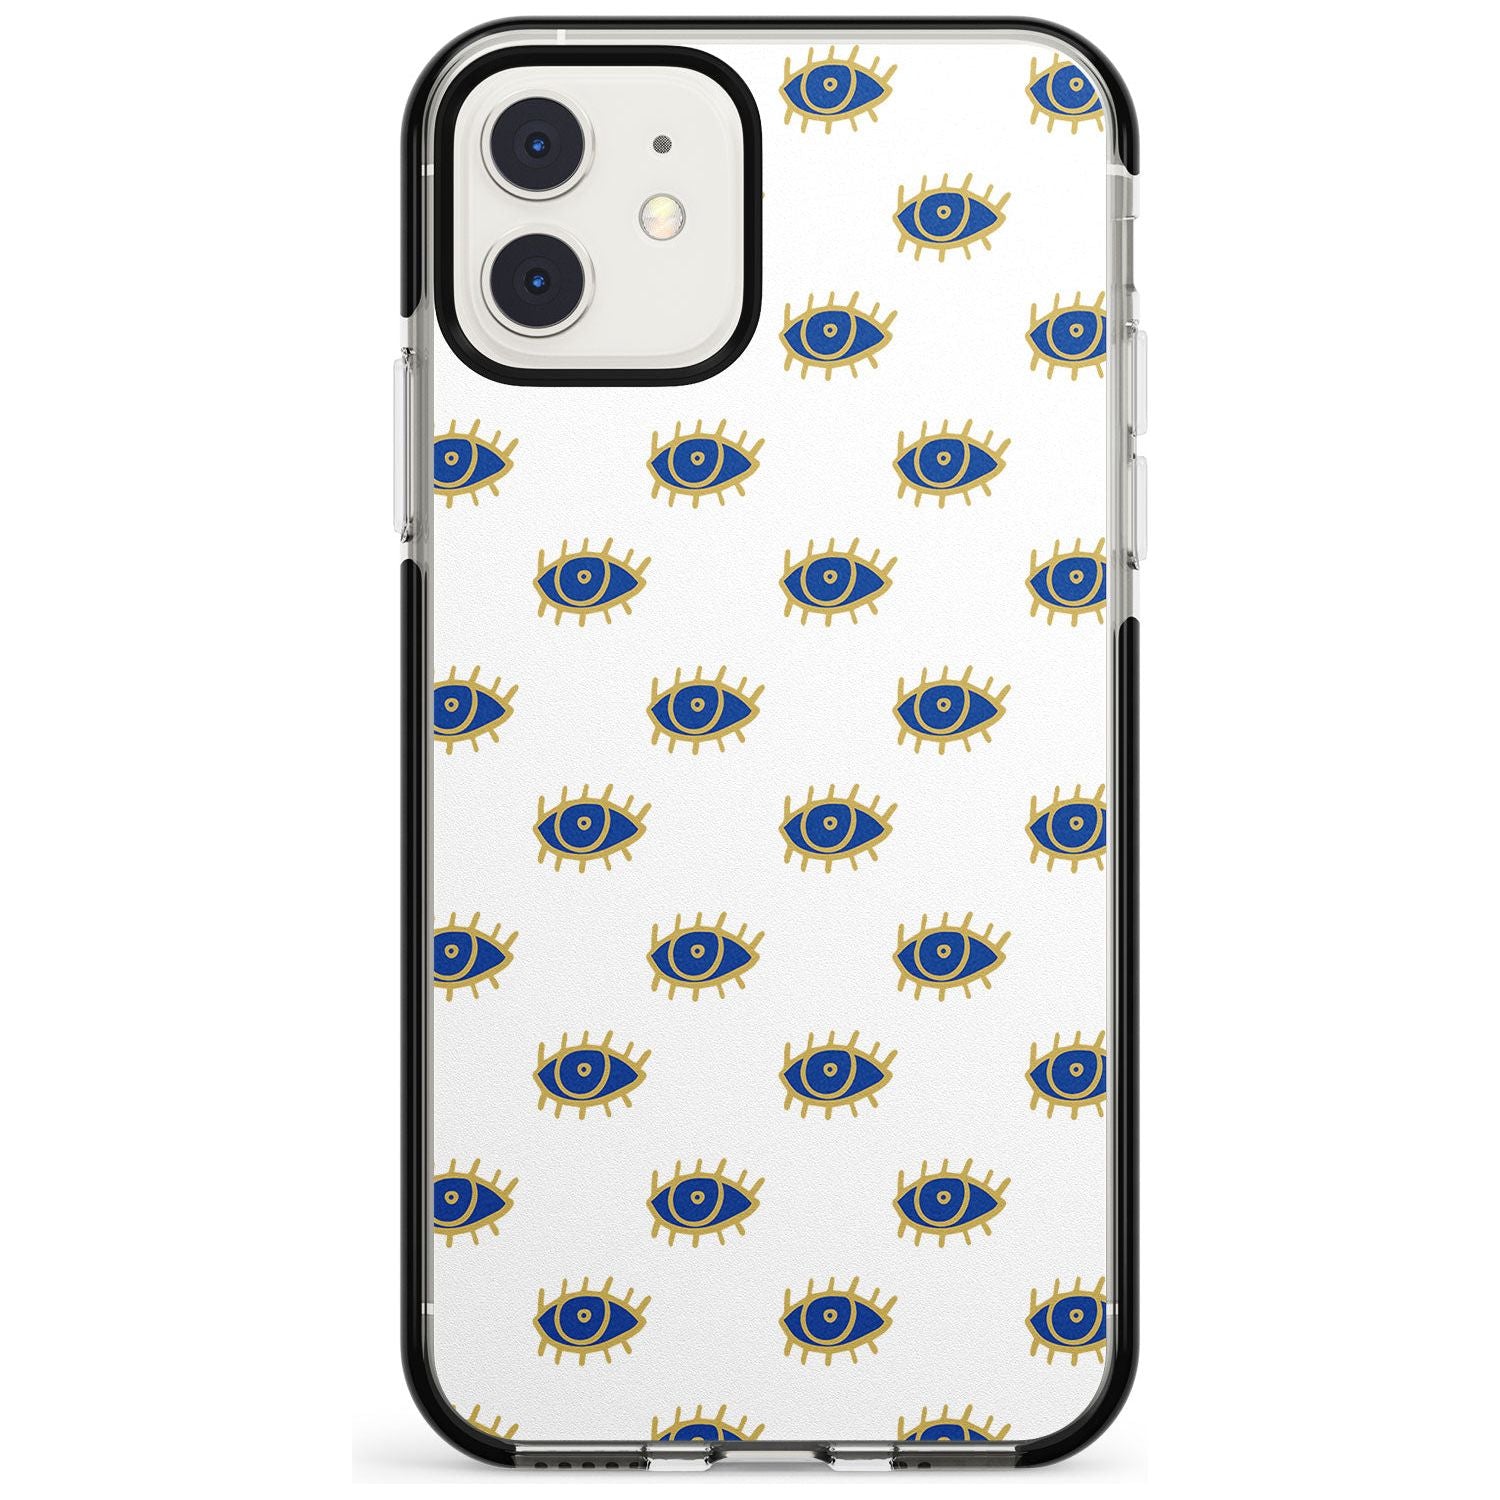 Gold Eyes Psychedelic Eyes Pattern Black Impact Phone Case for iPhone 11